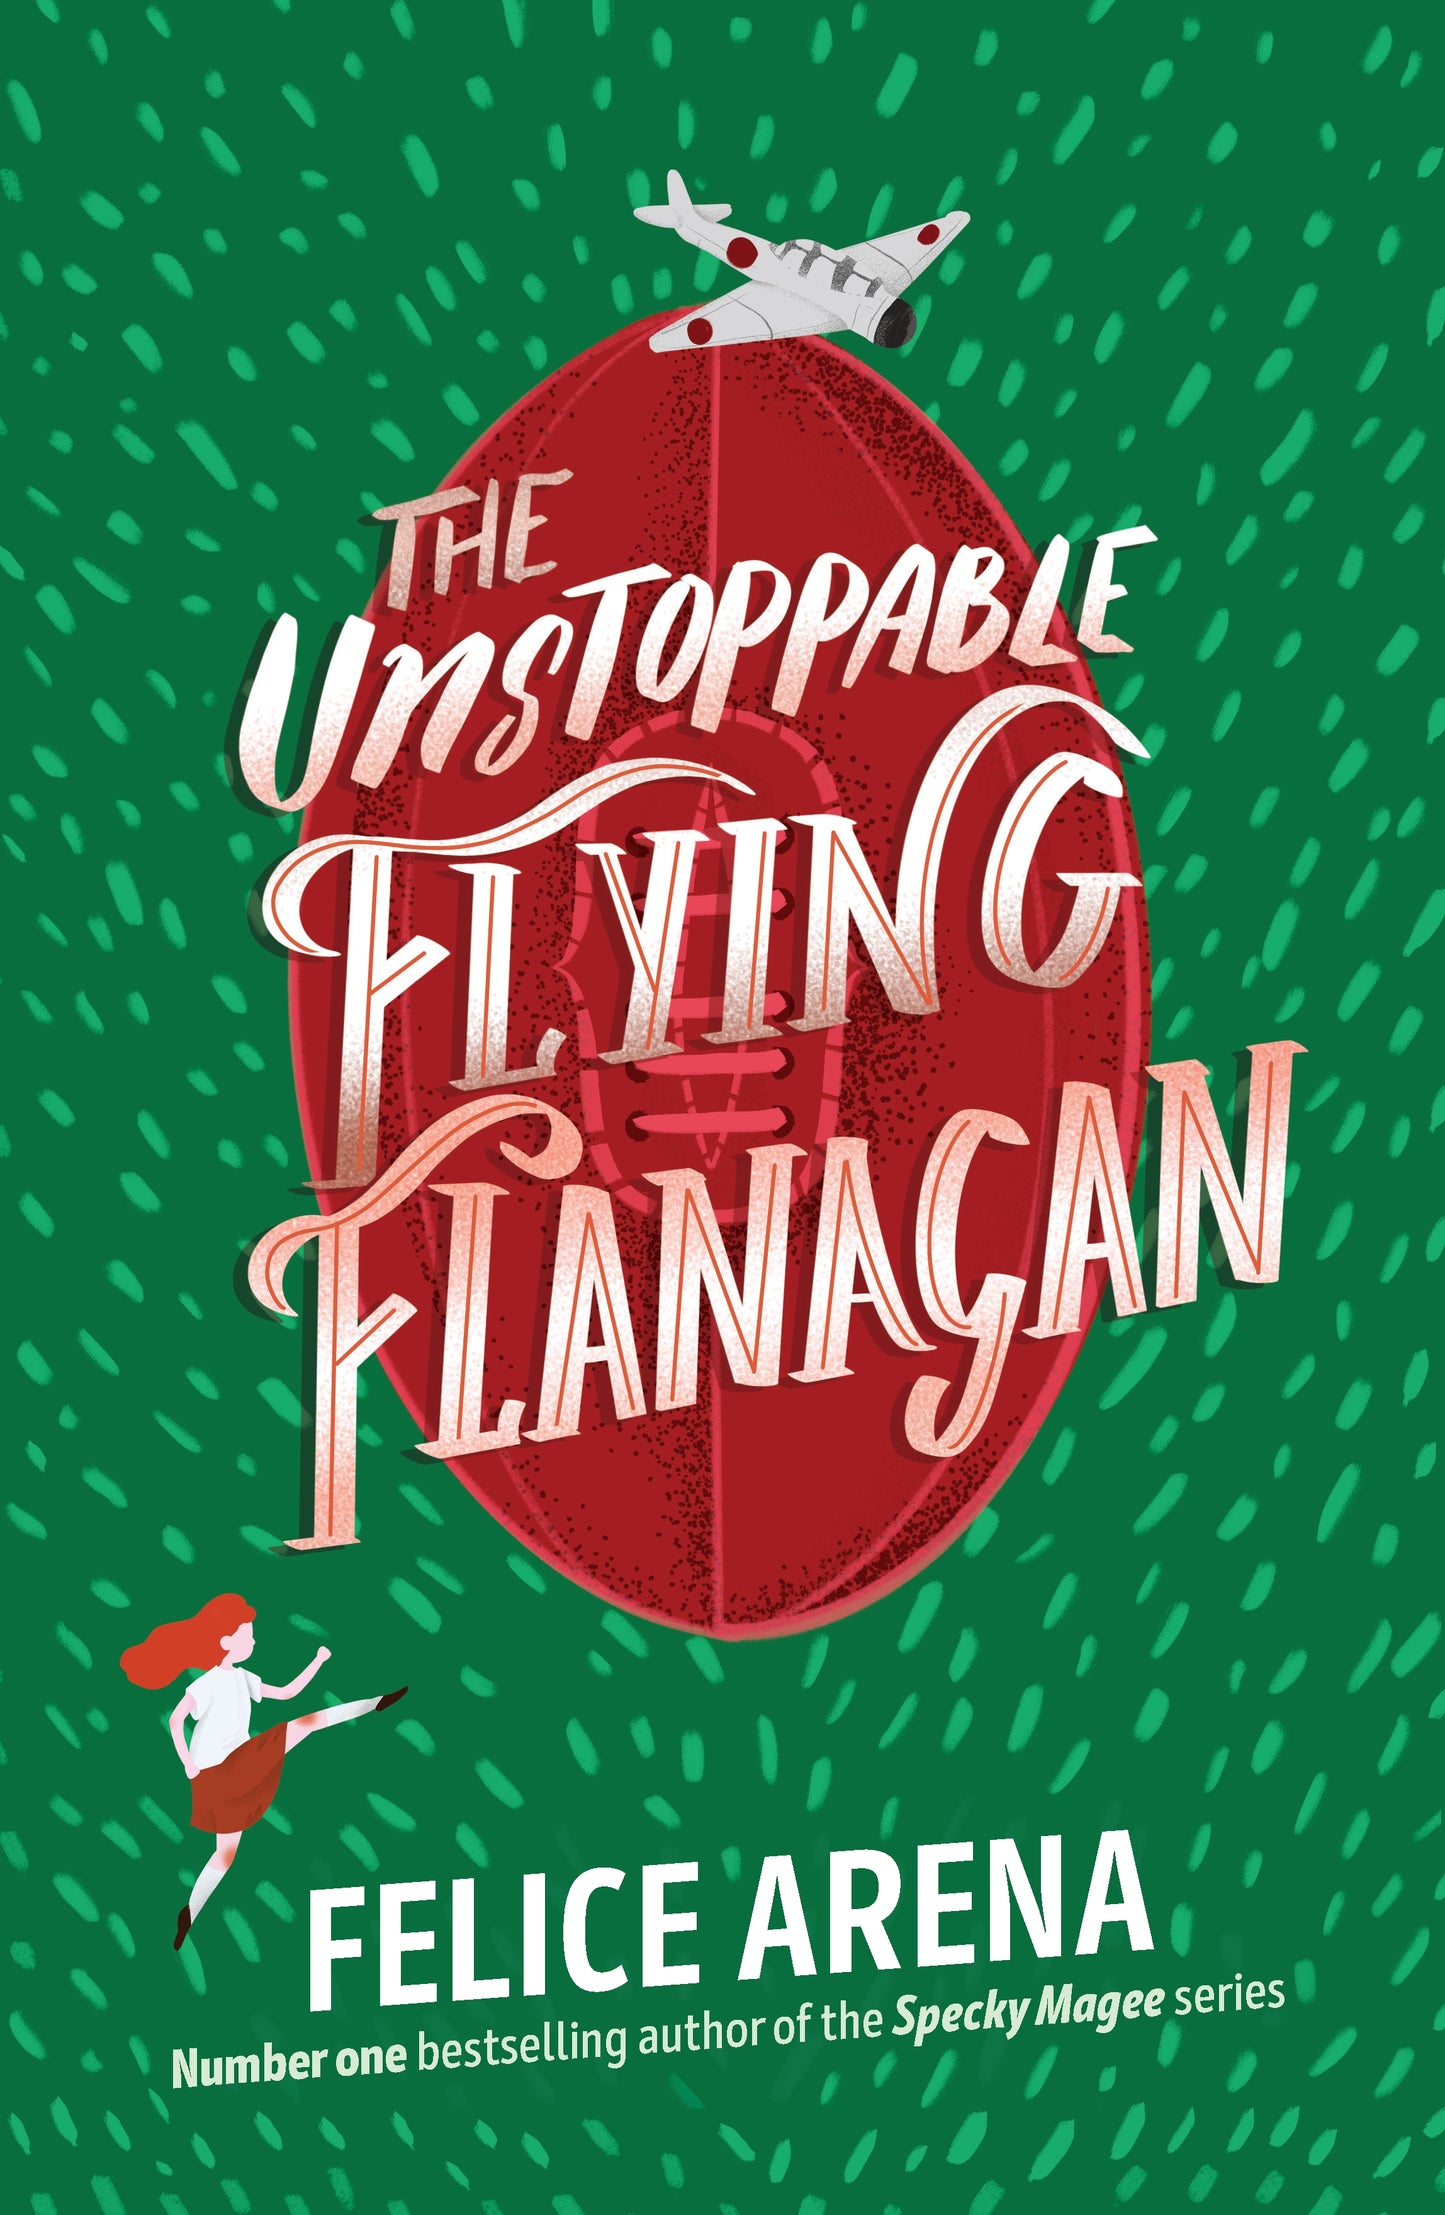 The Unstoppable Flying Flanagan by Felice Arena